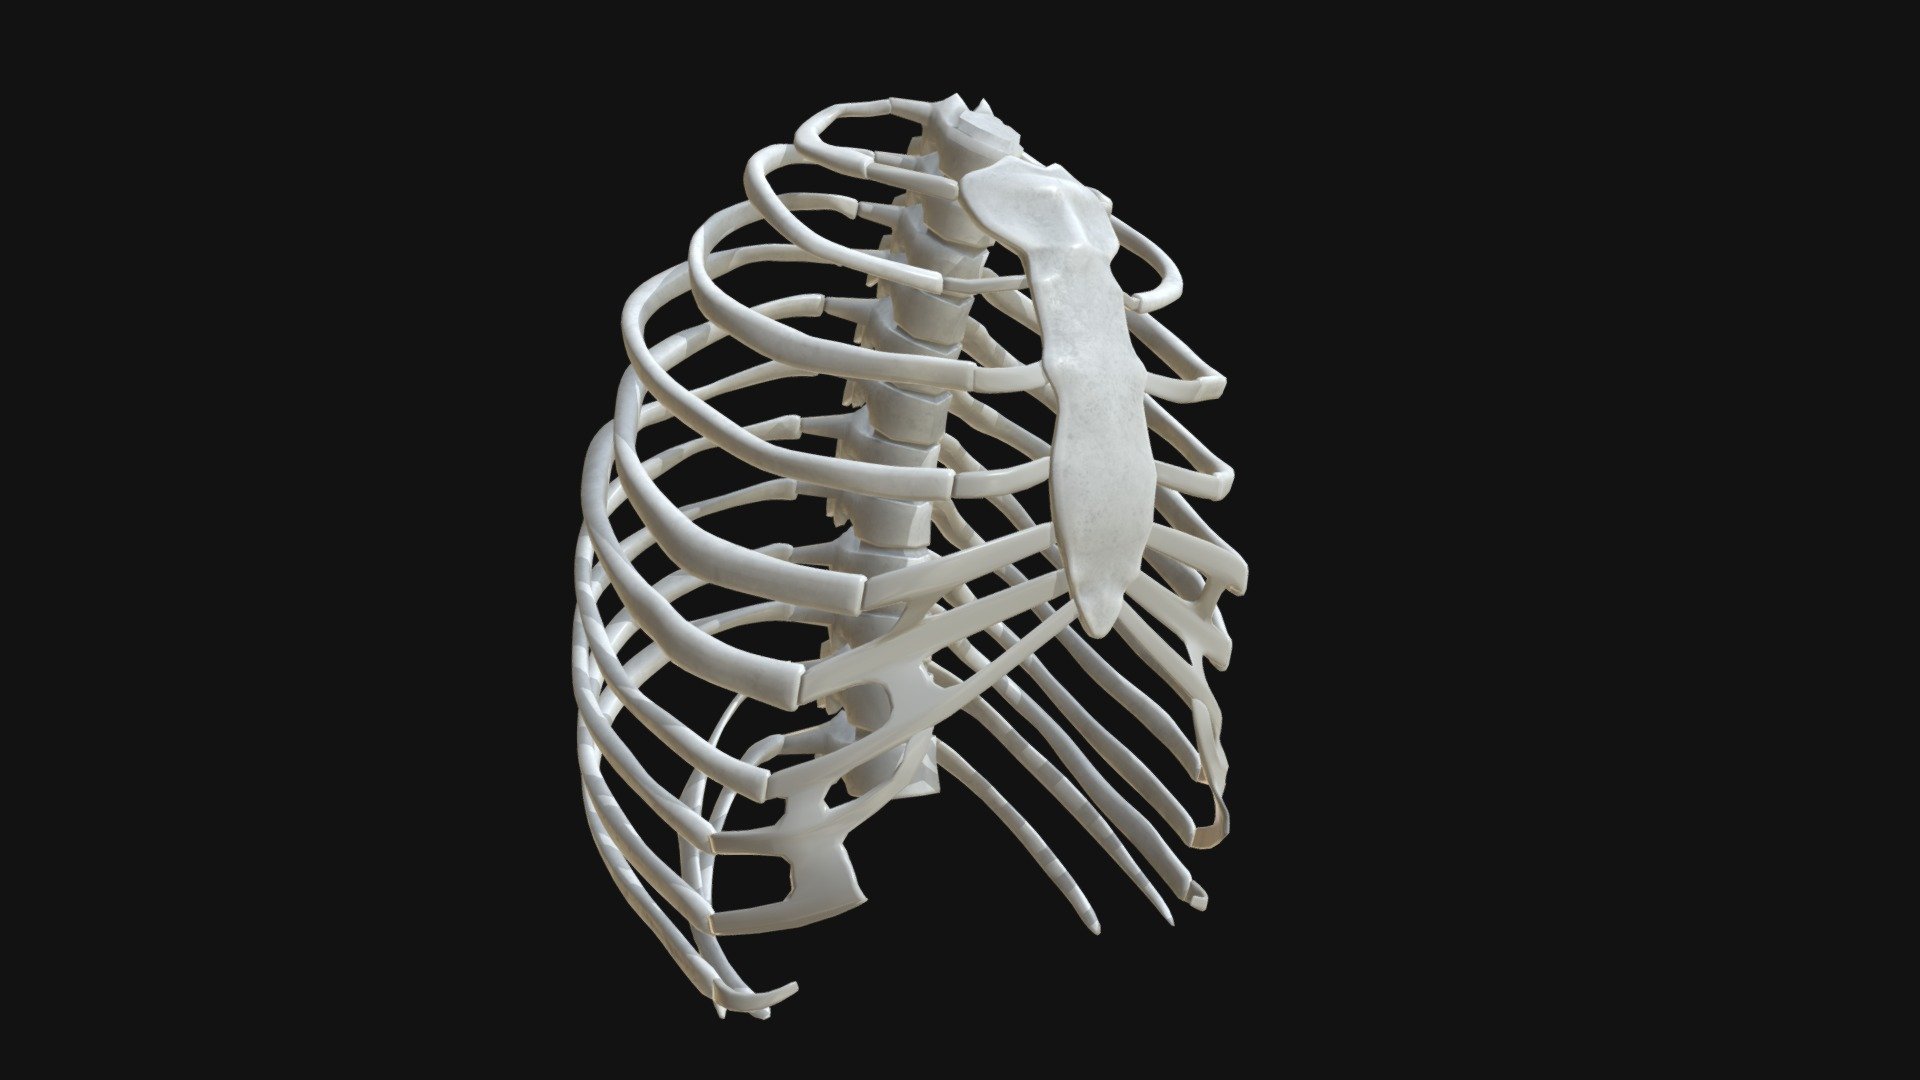 Structure of the Ribcage and Ribs